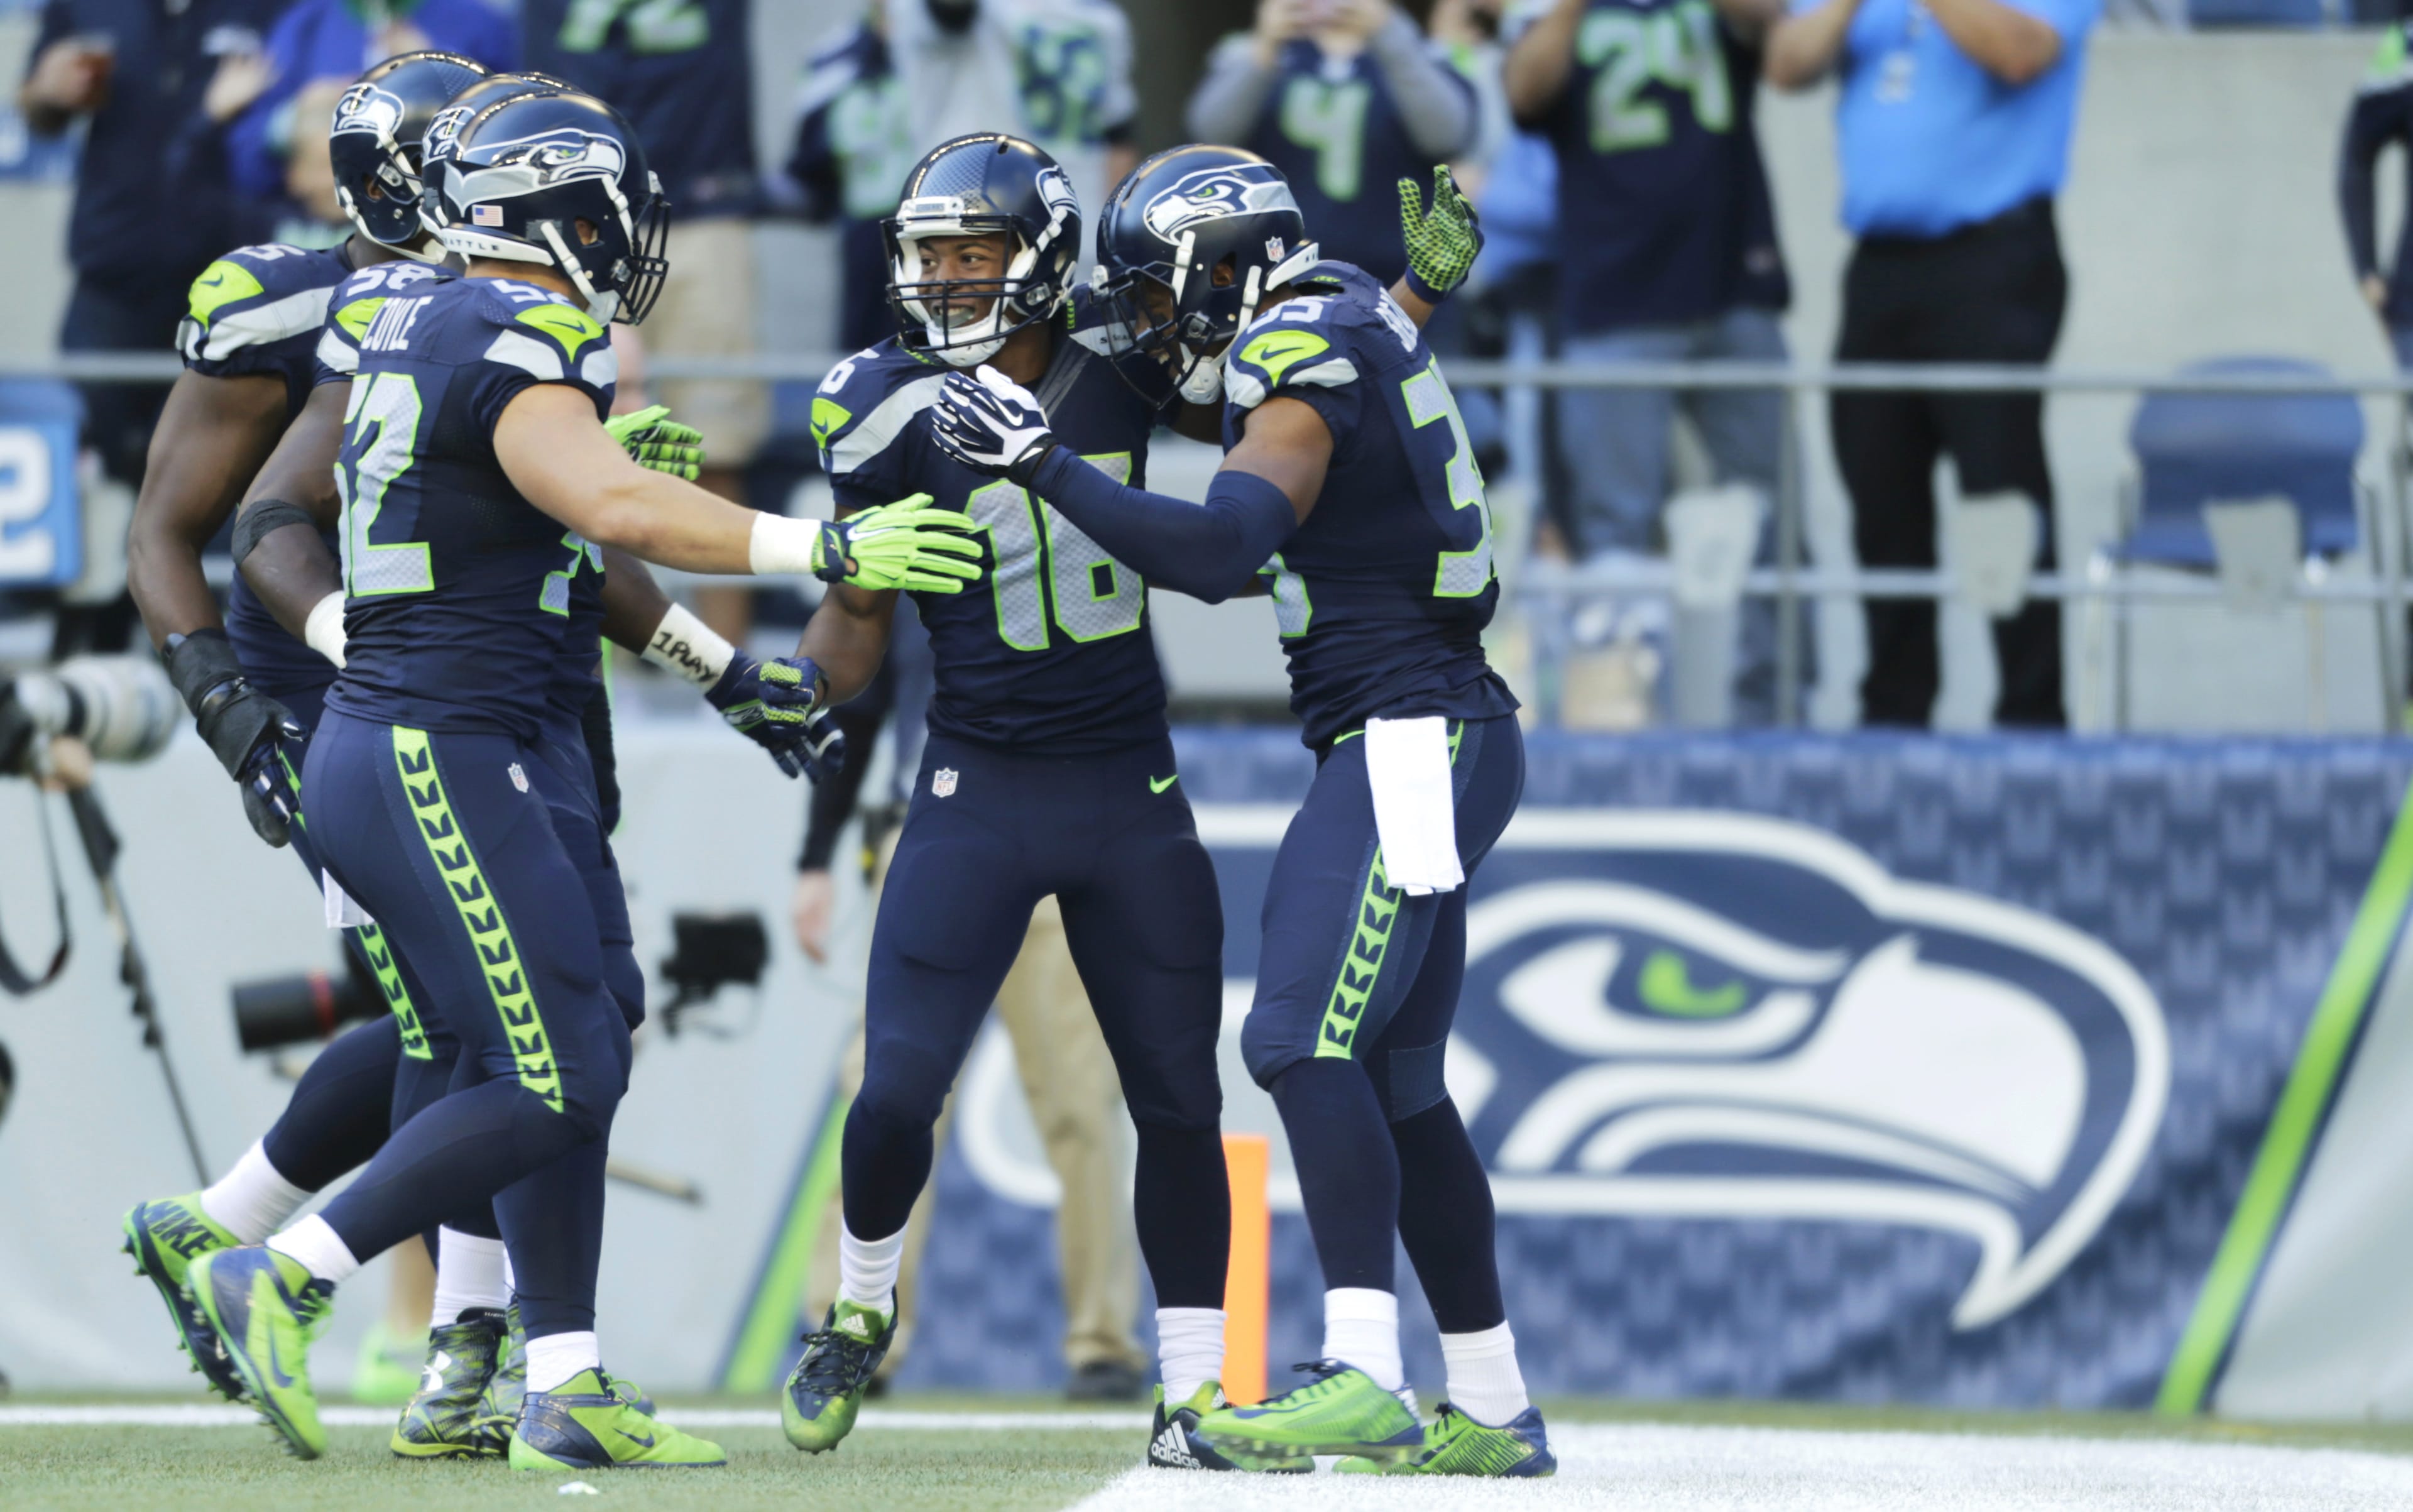 Seattle Seahawks Tyler Lockett, second from right, is greeted by teammates, including DeShawn Shead, right, after returning a Chicago Bears kickoff 105 yards for a touchdown to open the second half  Sunday, Sept. 27, 2015, in Seattle.